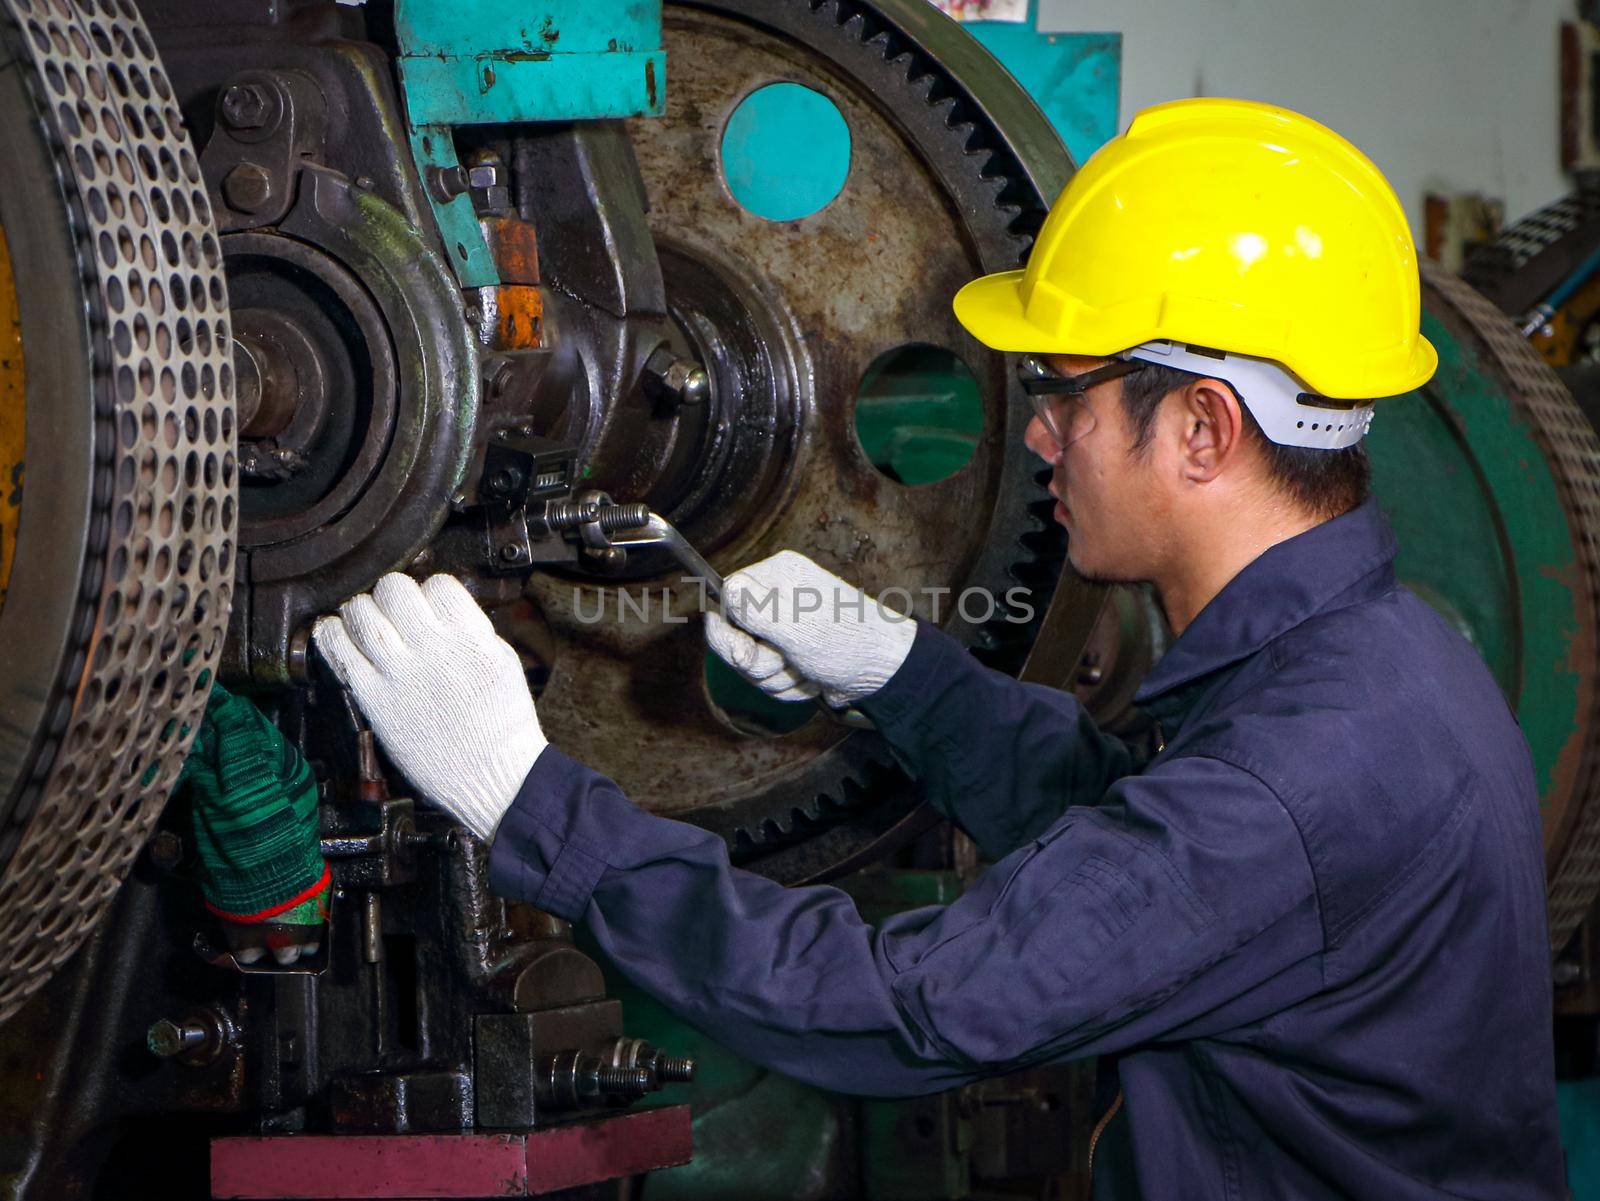 Asian technician Wear a uniform, helmet, use a wrench to inspect machines, by atitaph